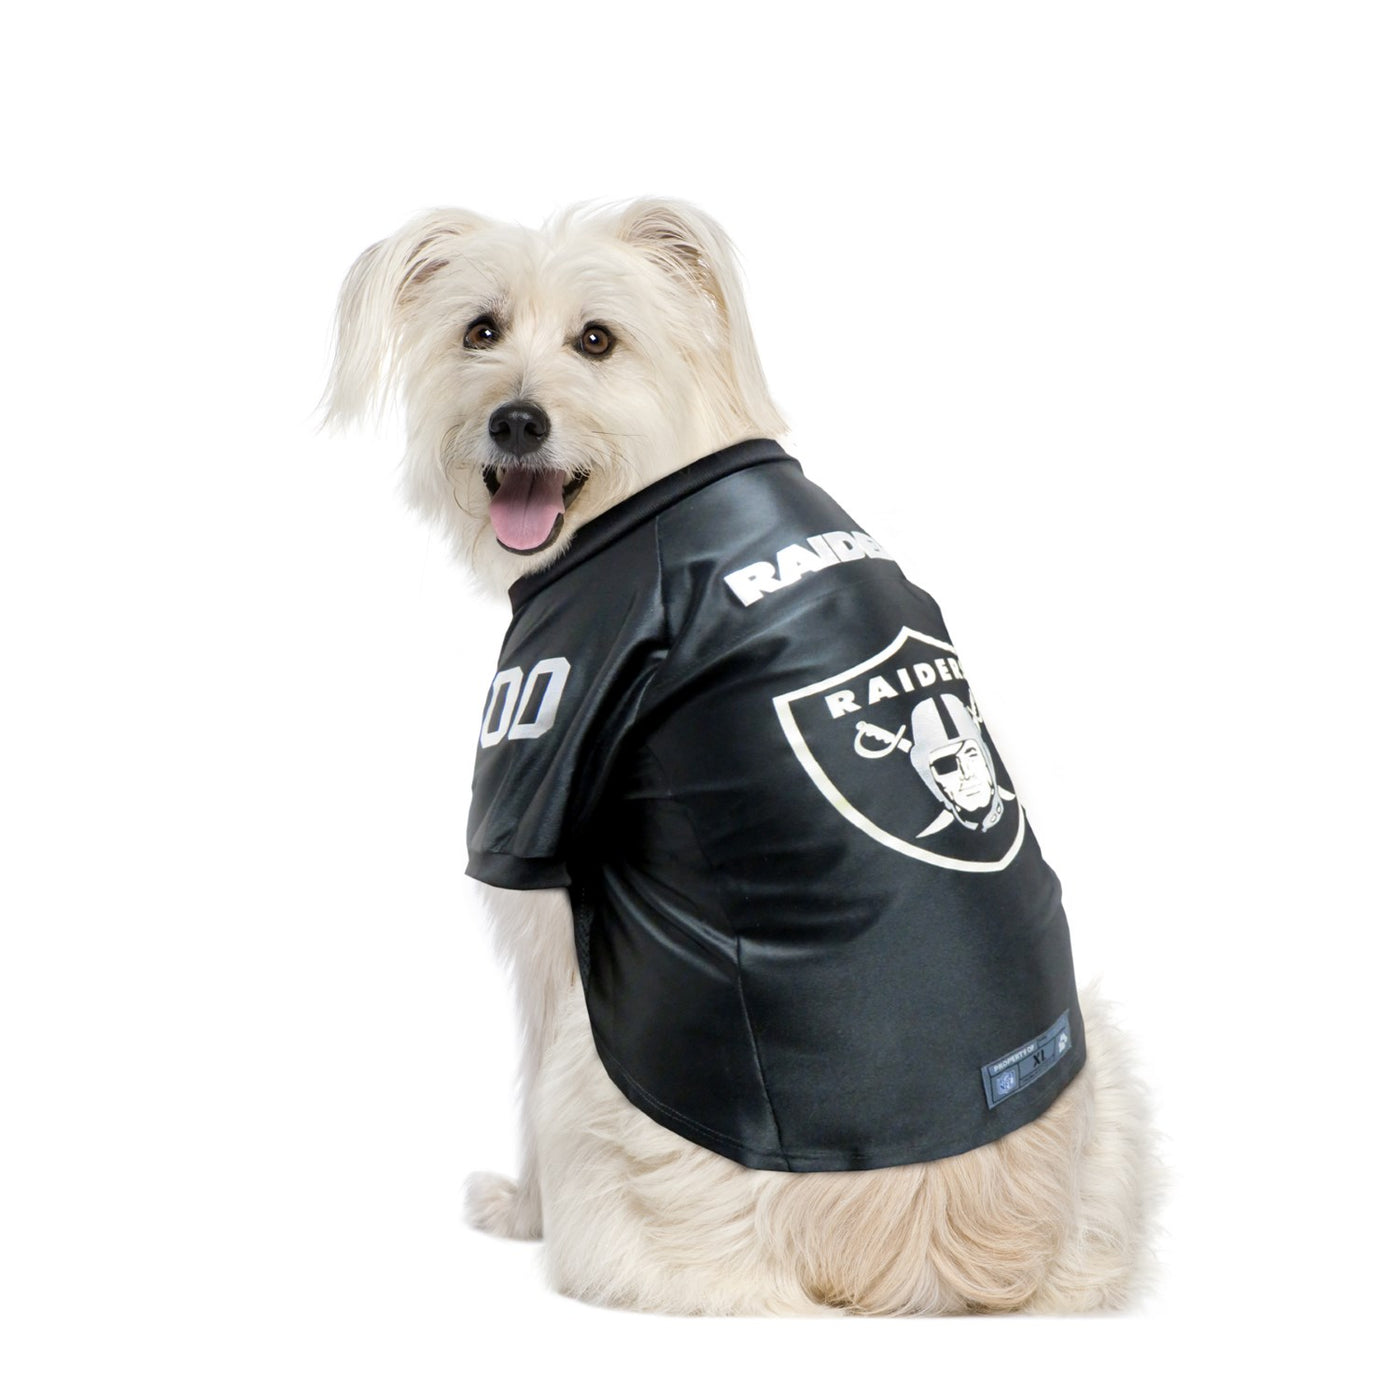  NFL PET SHIRT for Dogs & Cats - Las Vegas Raiders Dog T-Shirt,  X-Large. - Cutest Pet Tee Shirt for the real sporty pup : Sports & Outdoors